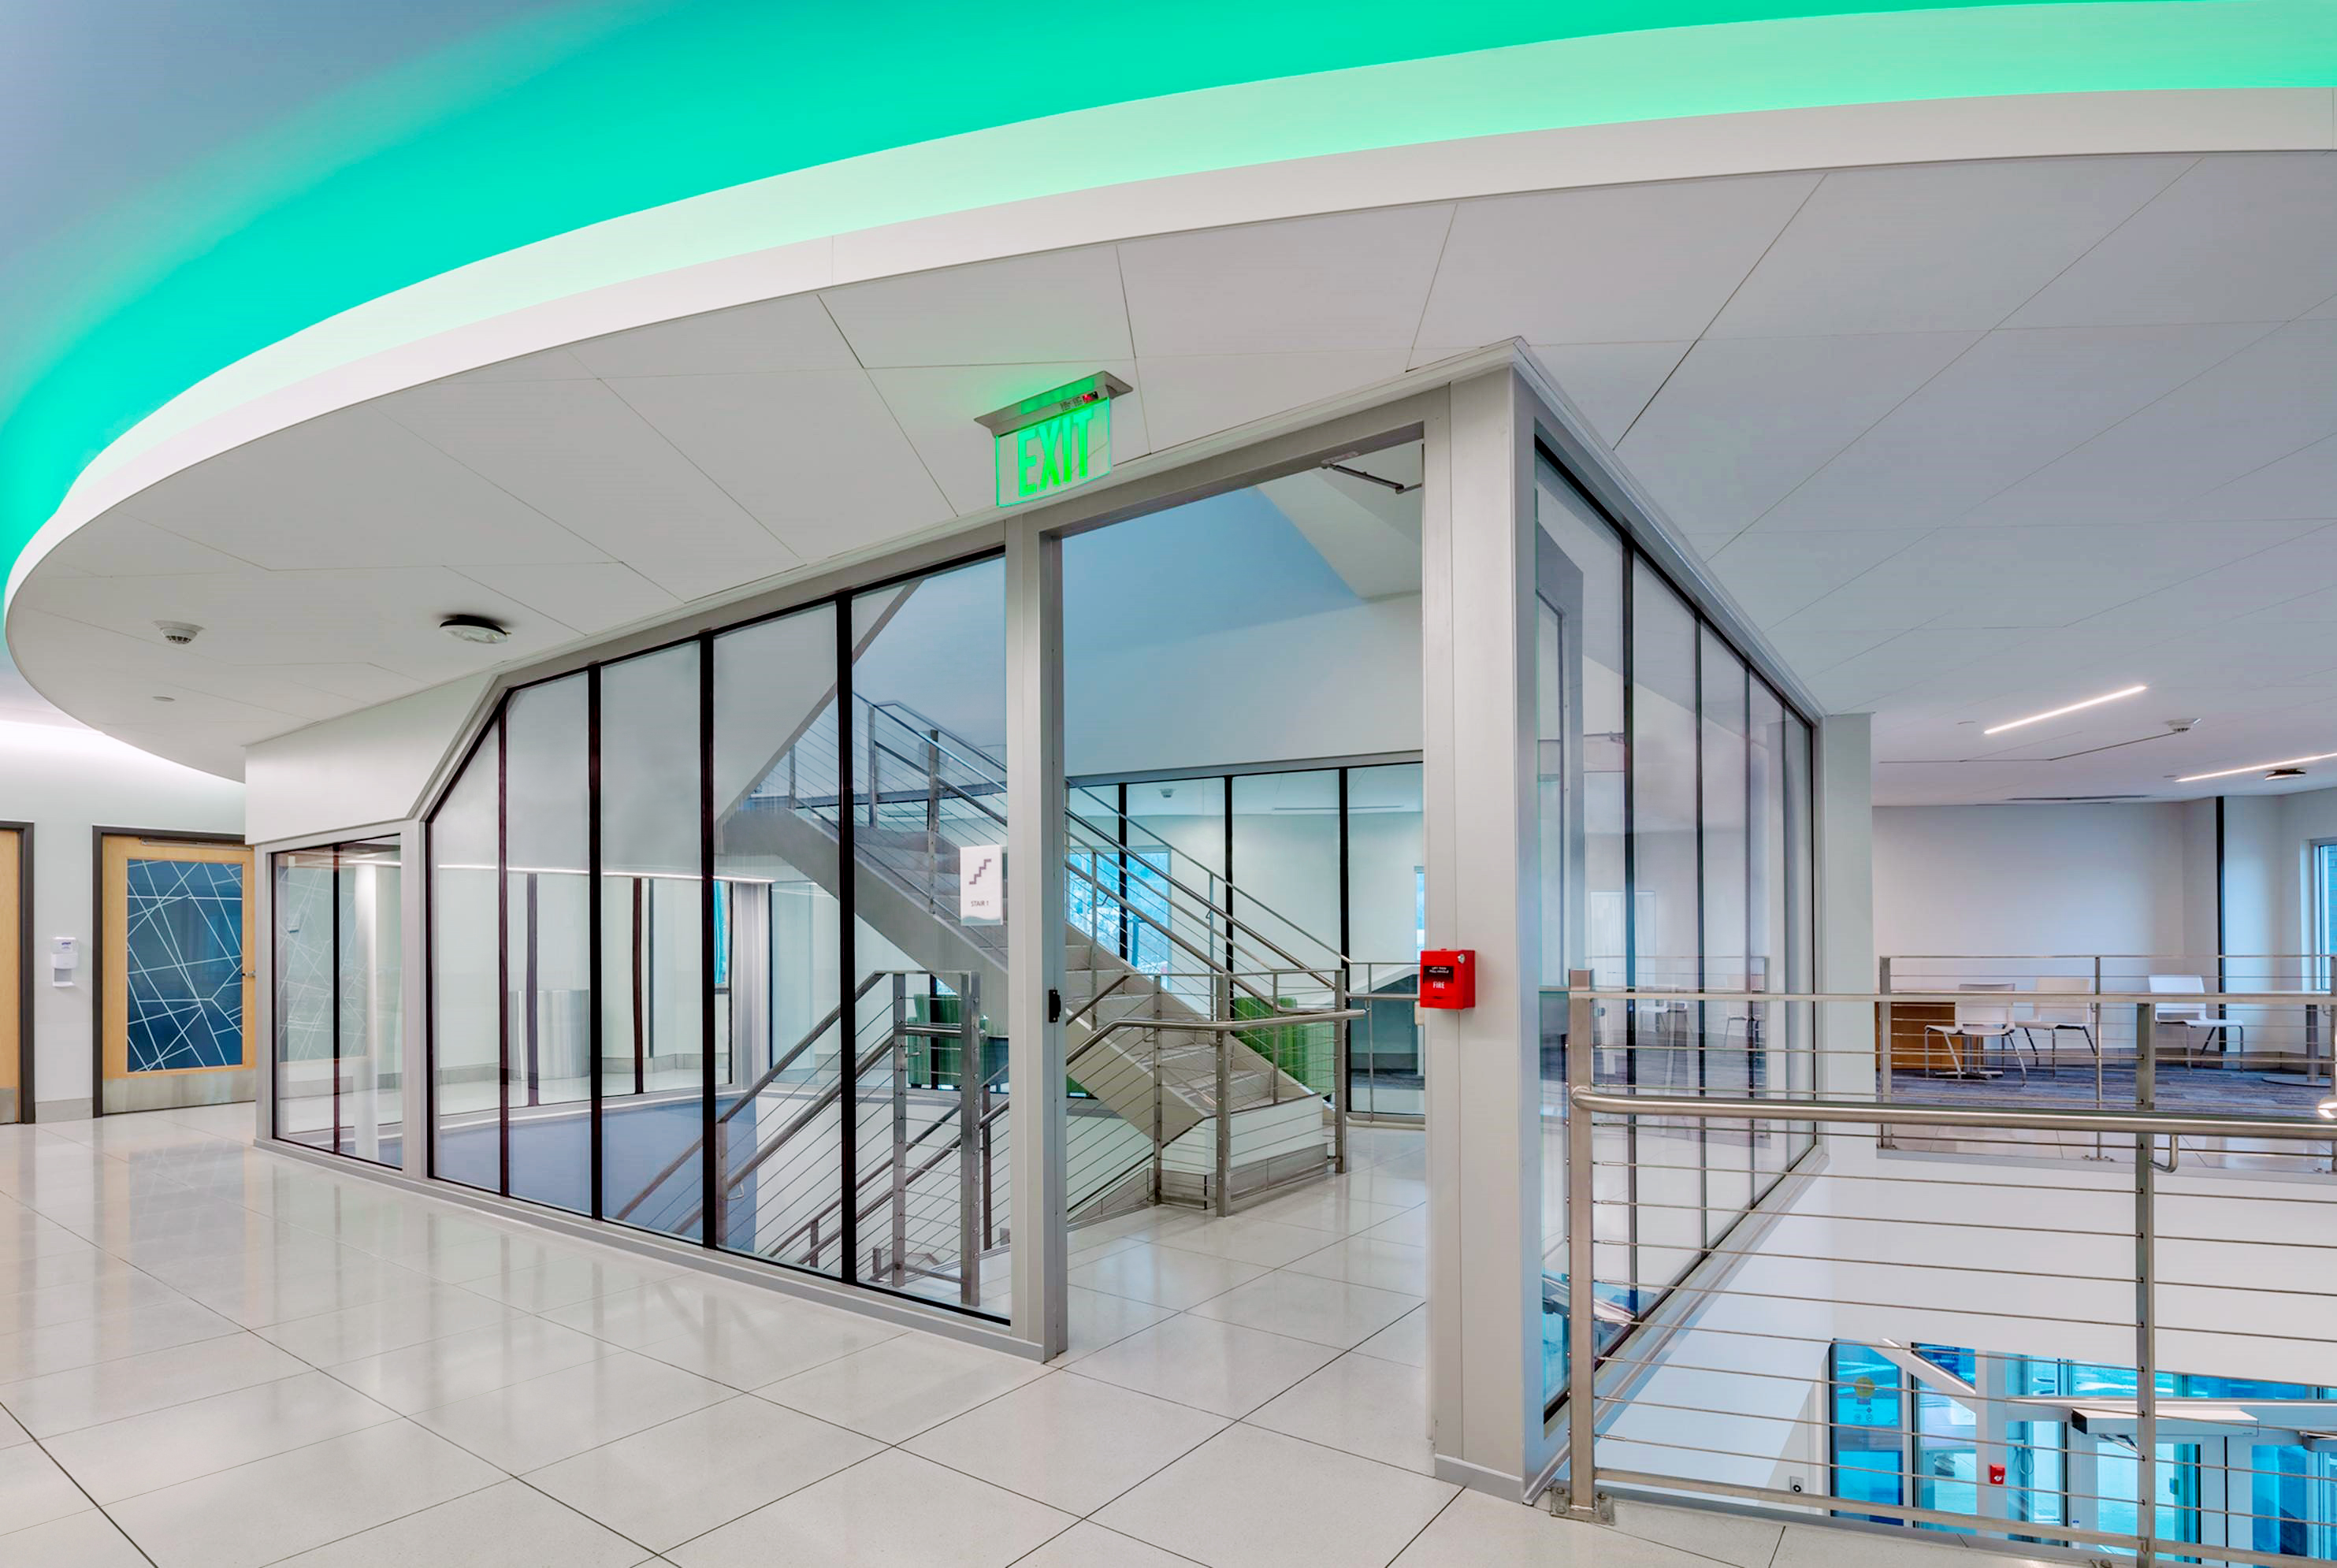 Striking Fire-Rated Glass Stairwell Boosts Wellness at Innovative Healthcare Facility